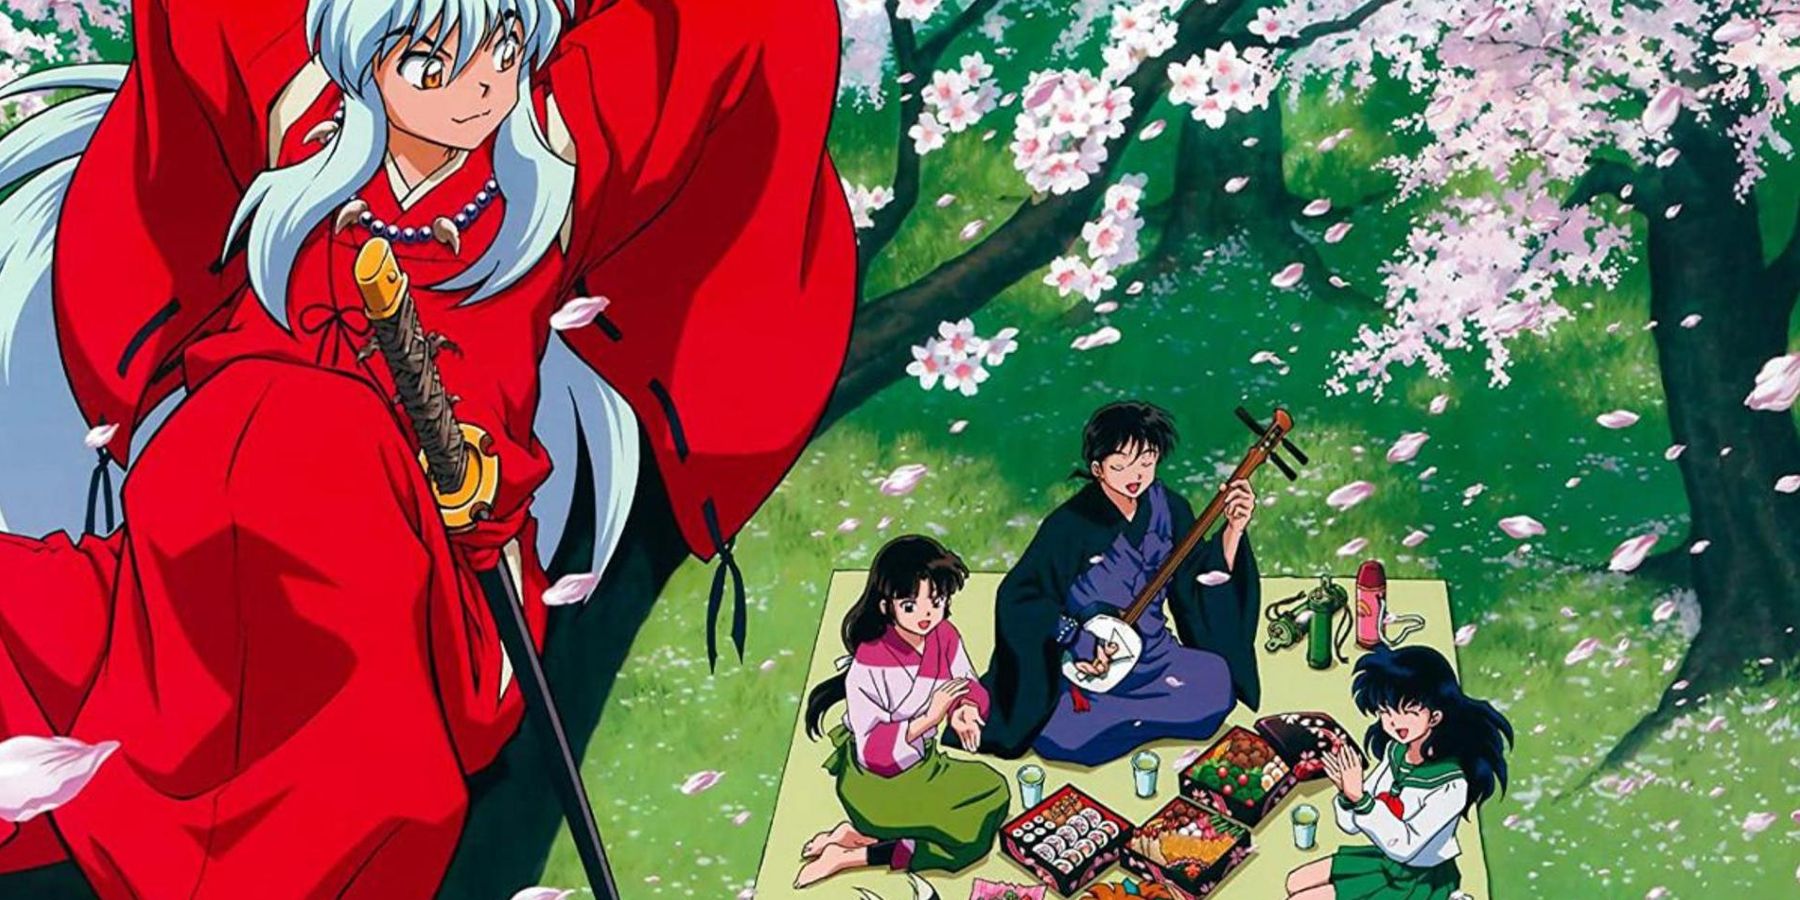 main cast of inuyasha having a picnic. Most are on the ground while the red-clothed inuyasha watches happily from a tree